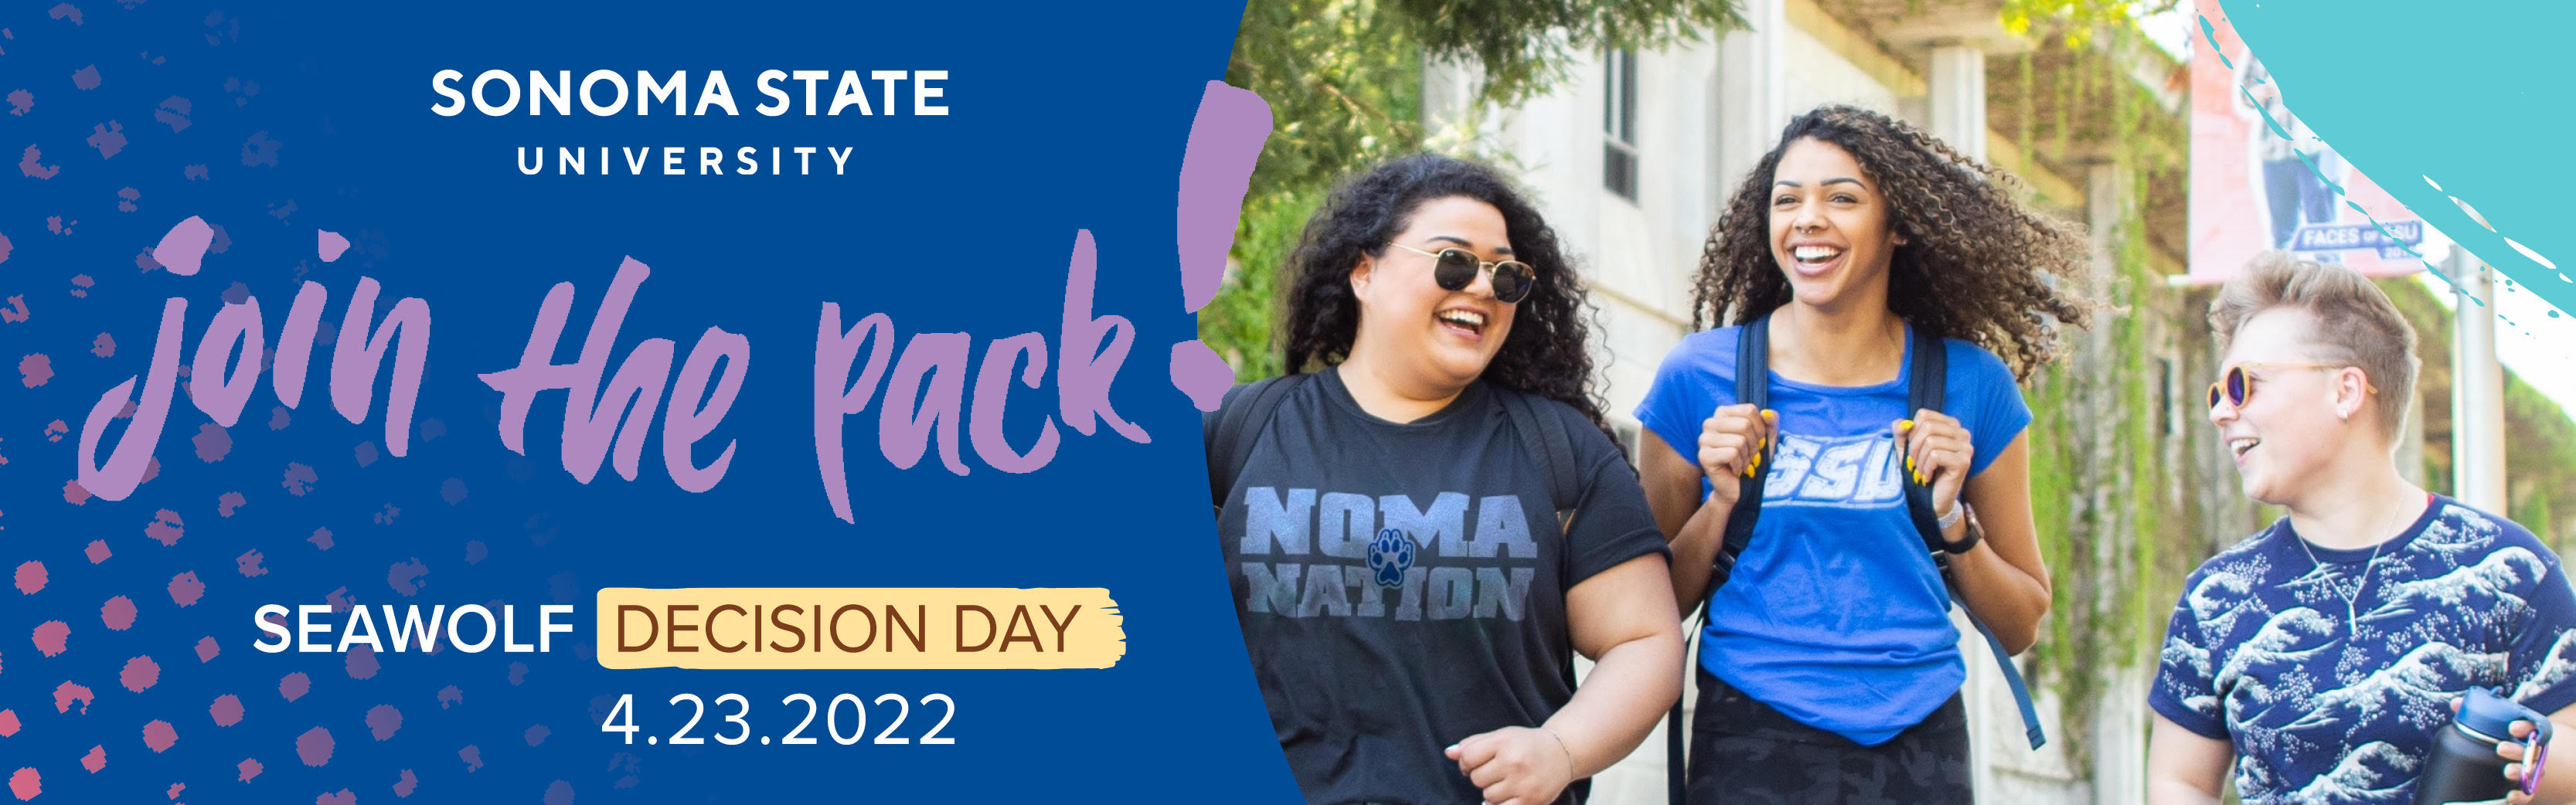 Sonoma State logo and text: Join the Pack, Seawolf Decision Day, 4.23.2022 and photo of students walking